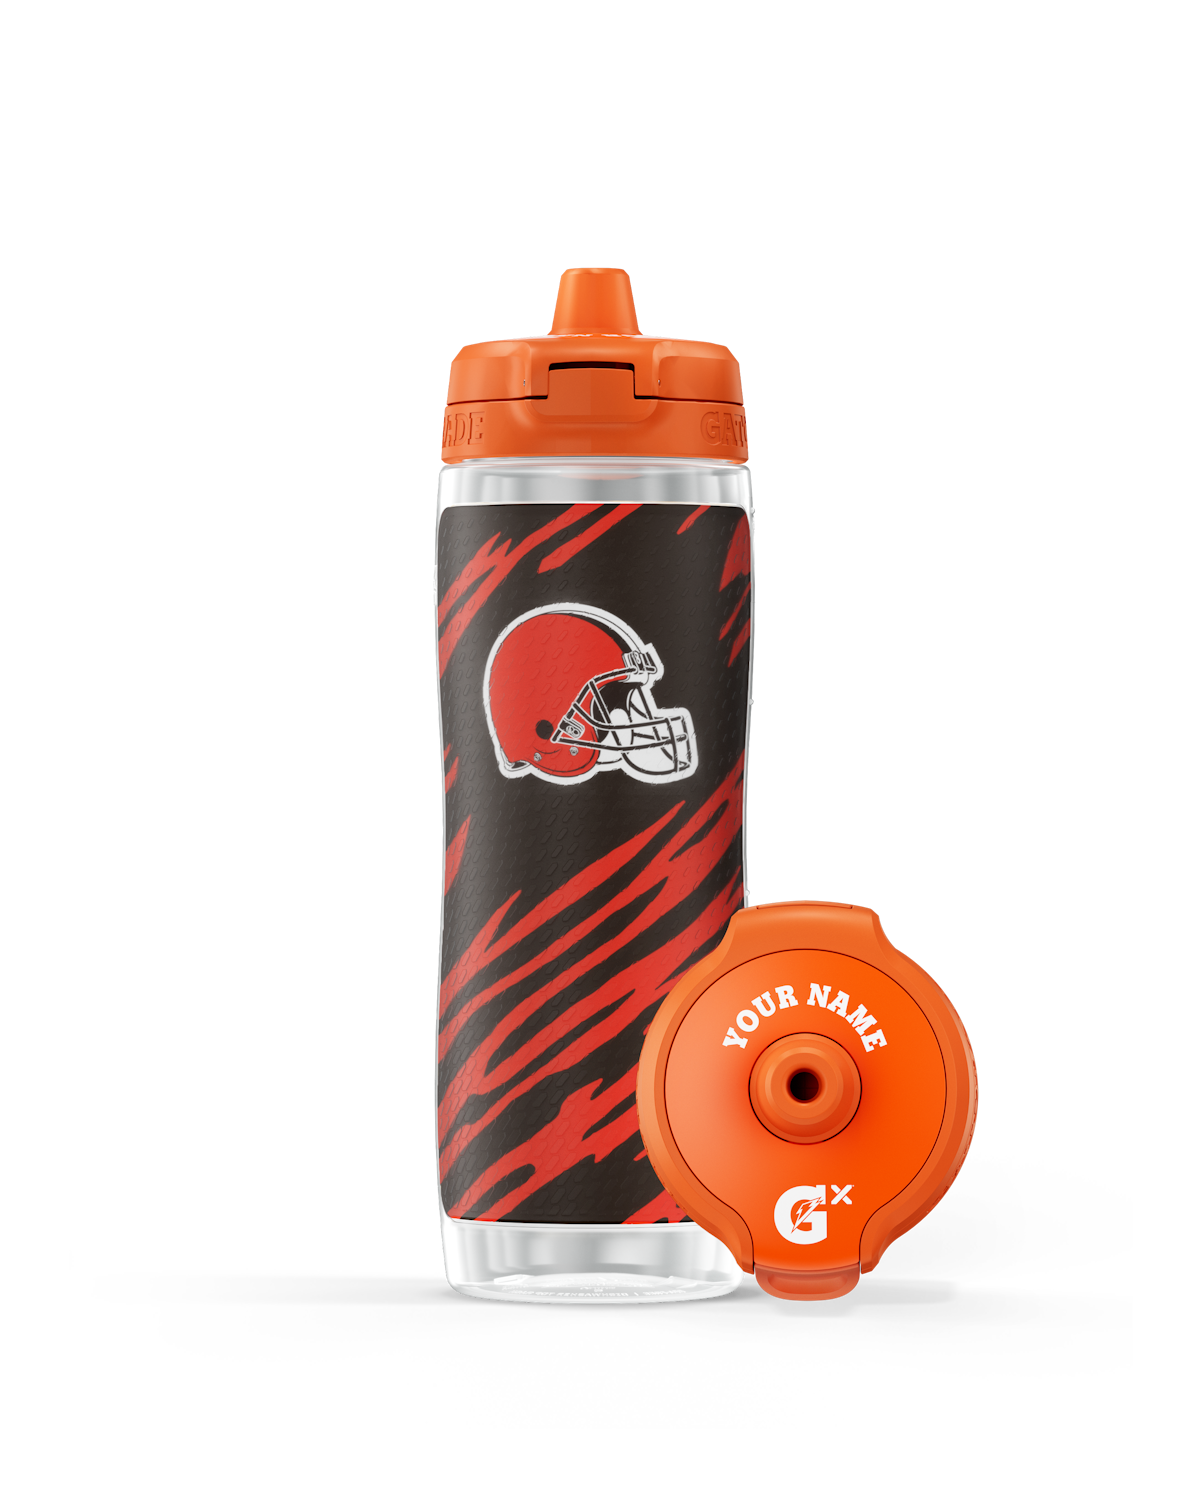 https://www.datocms-assets.com/101859/1696890717-00052000055801_nfl_new2023_bottles_clevelandbrowns_producttiles_2680x3344.png?auto=format&fit=fill&w=1200&ar=4%3A3&fill=solid